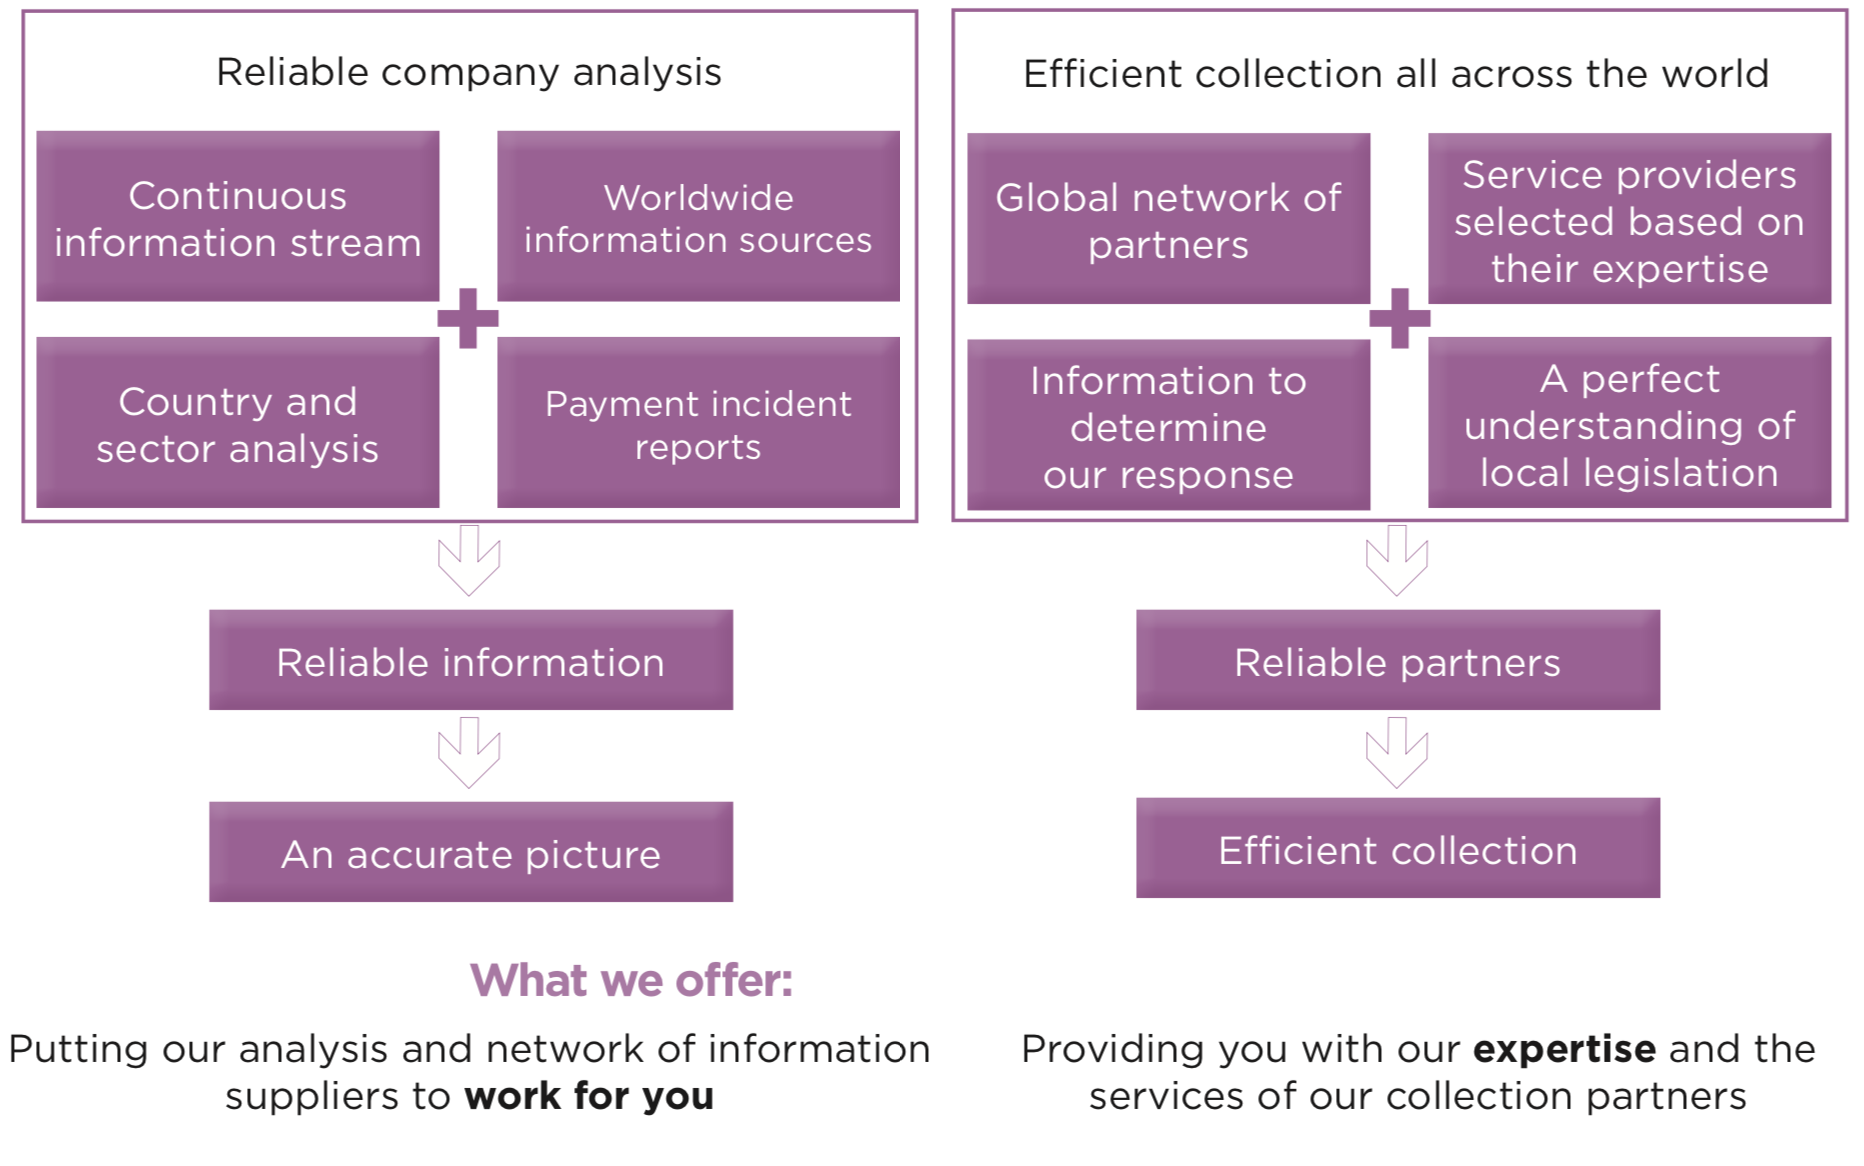 What we offer: Putting our analysis and network of information suppliers to work for you